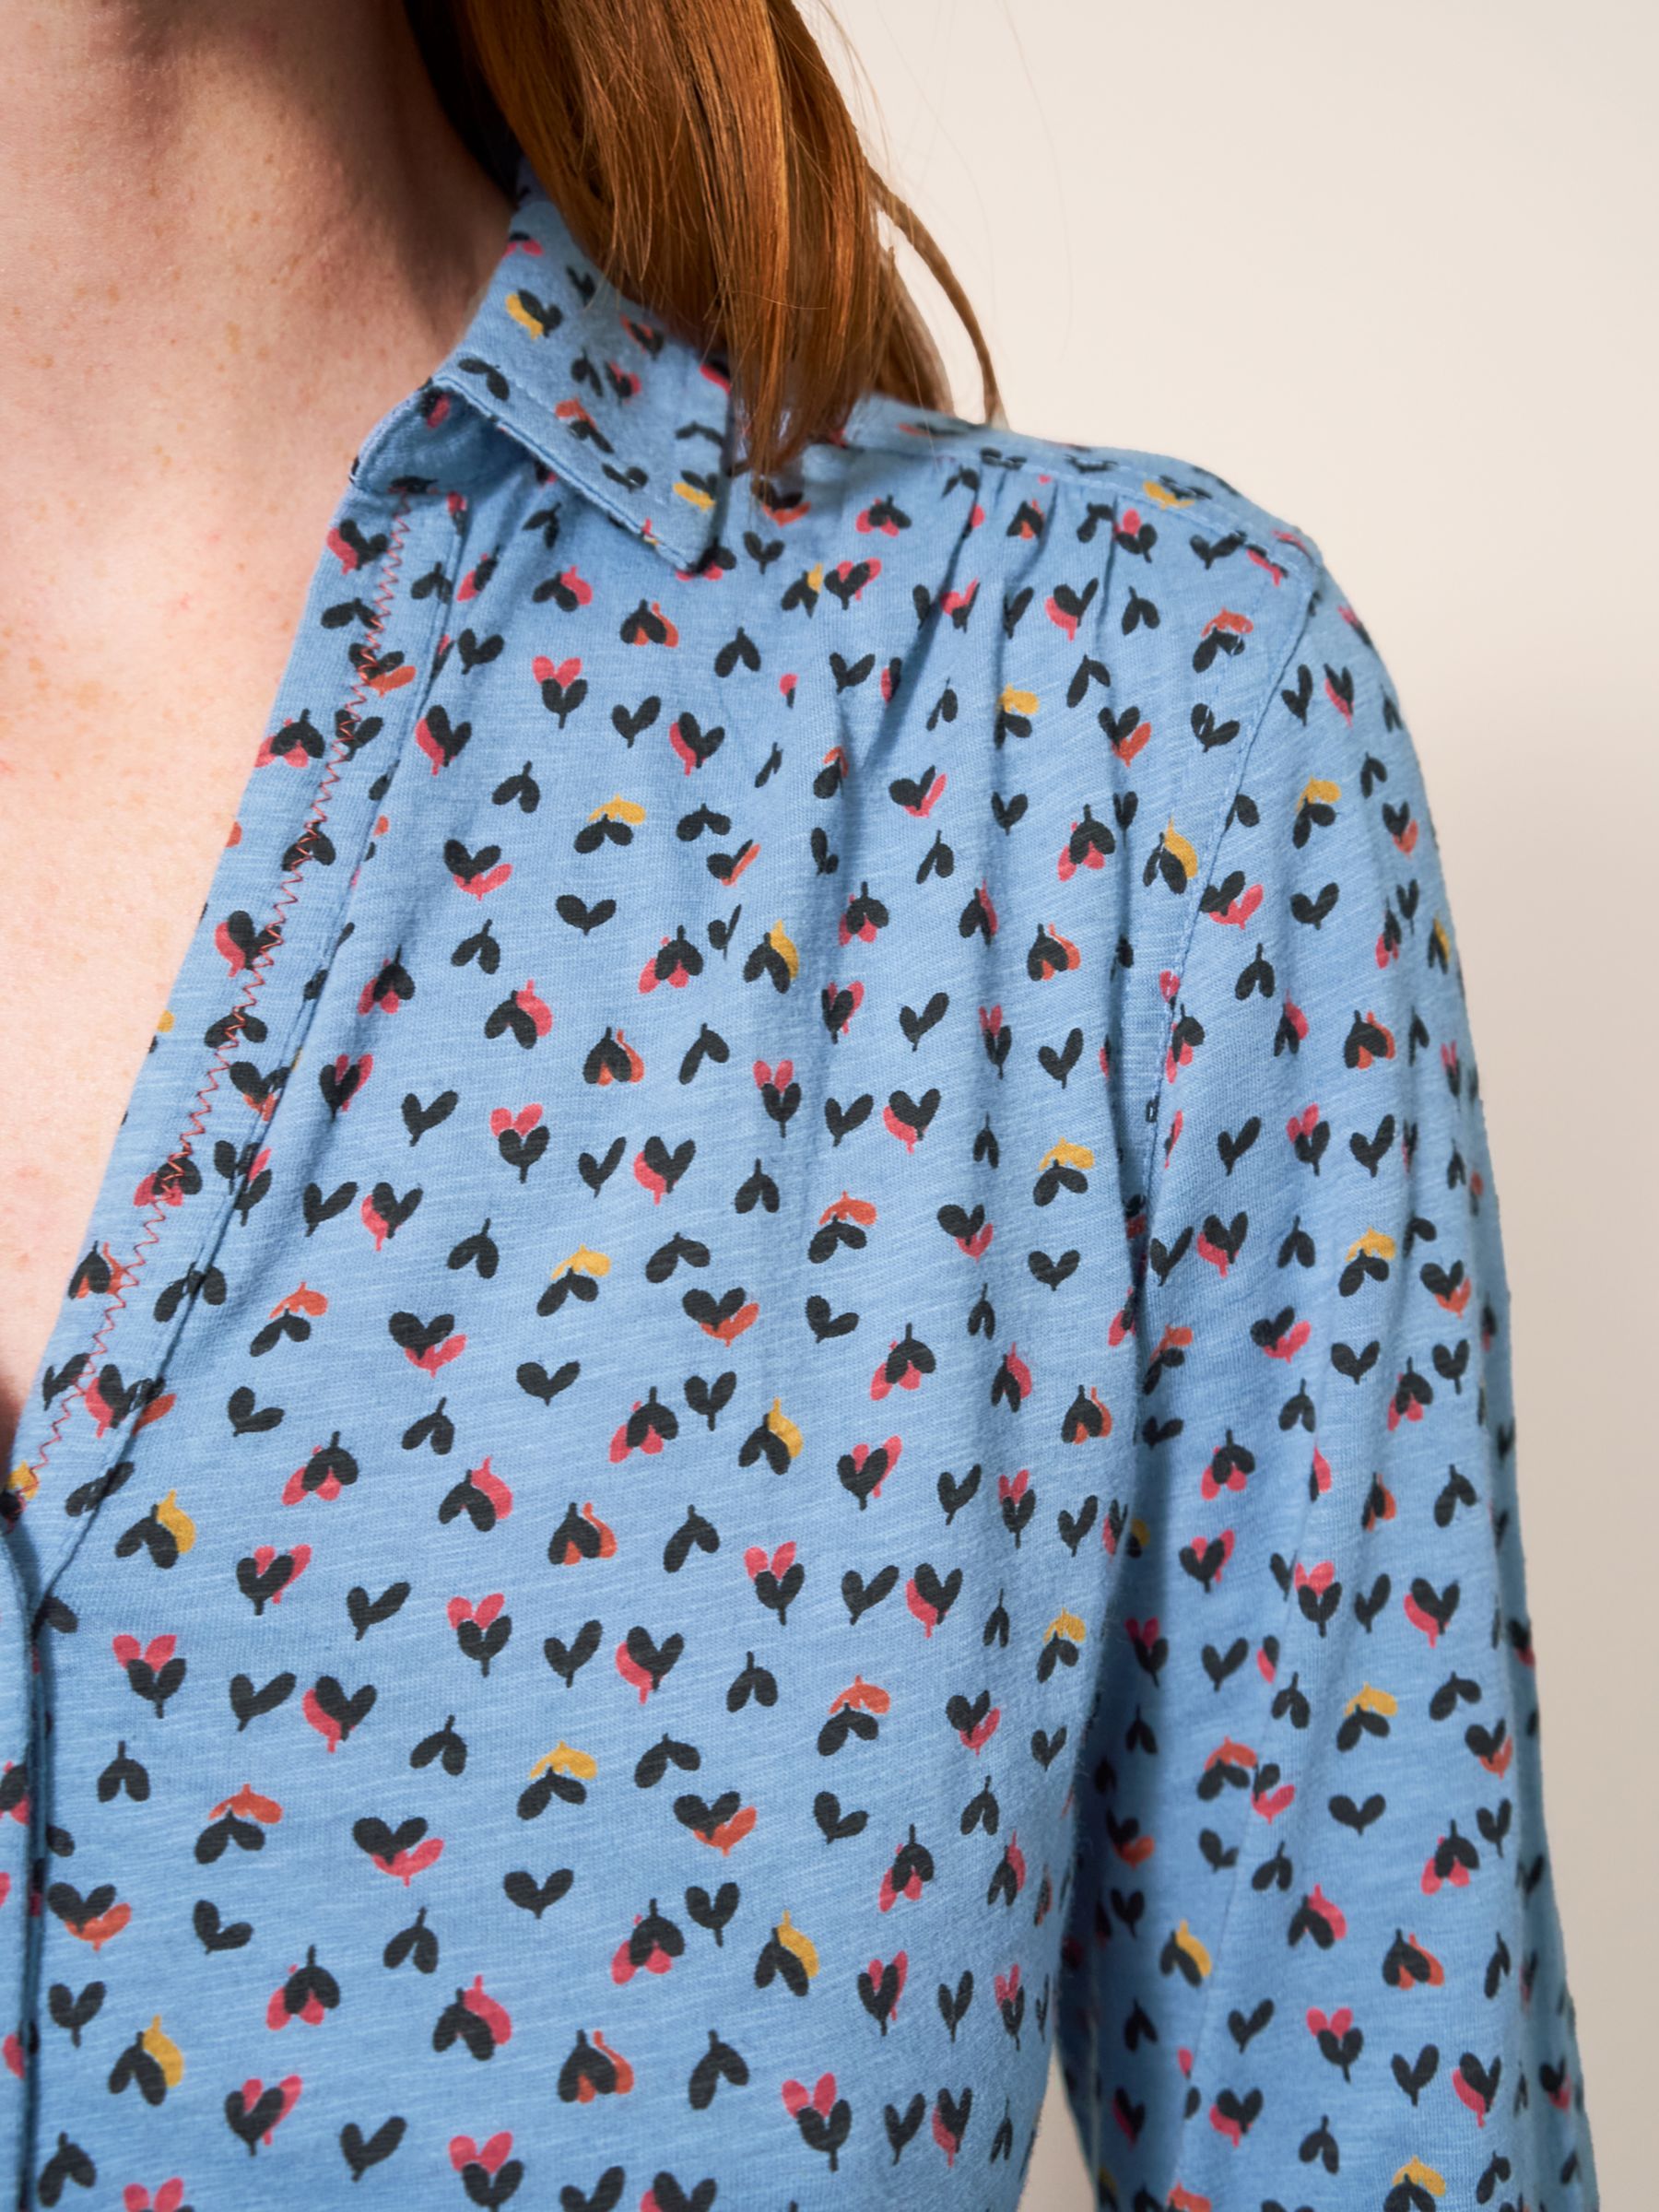 Buy White Stuff Annie Jersey Print Shirt, Teal/Multi Online at johnlewis.com